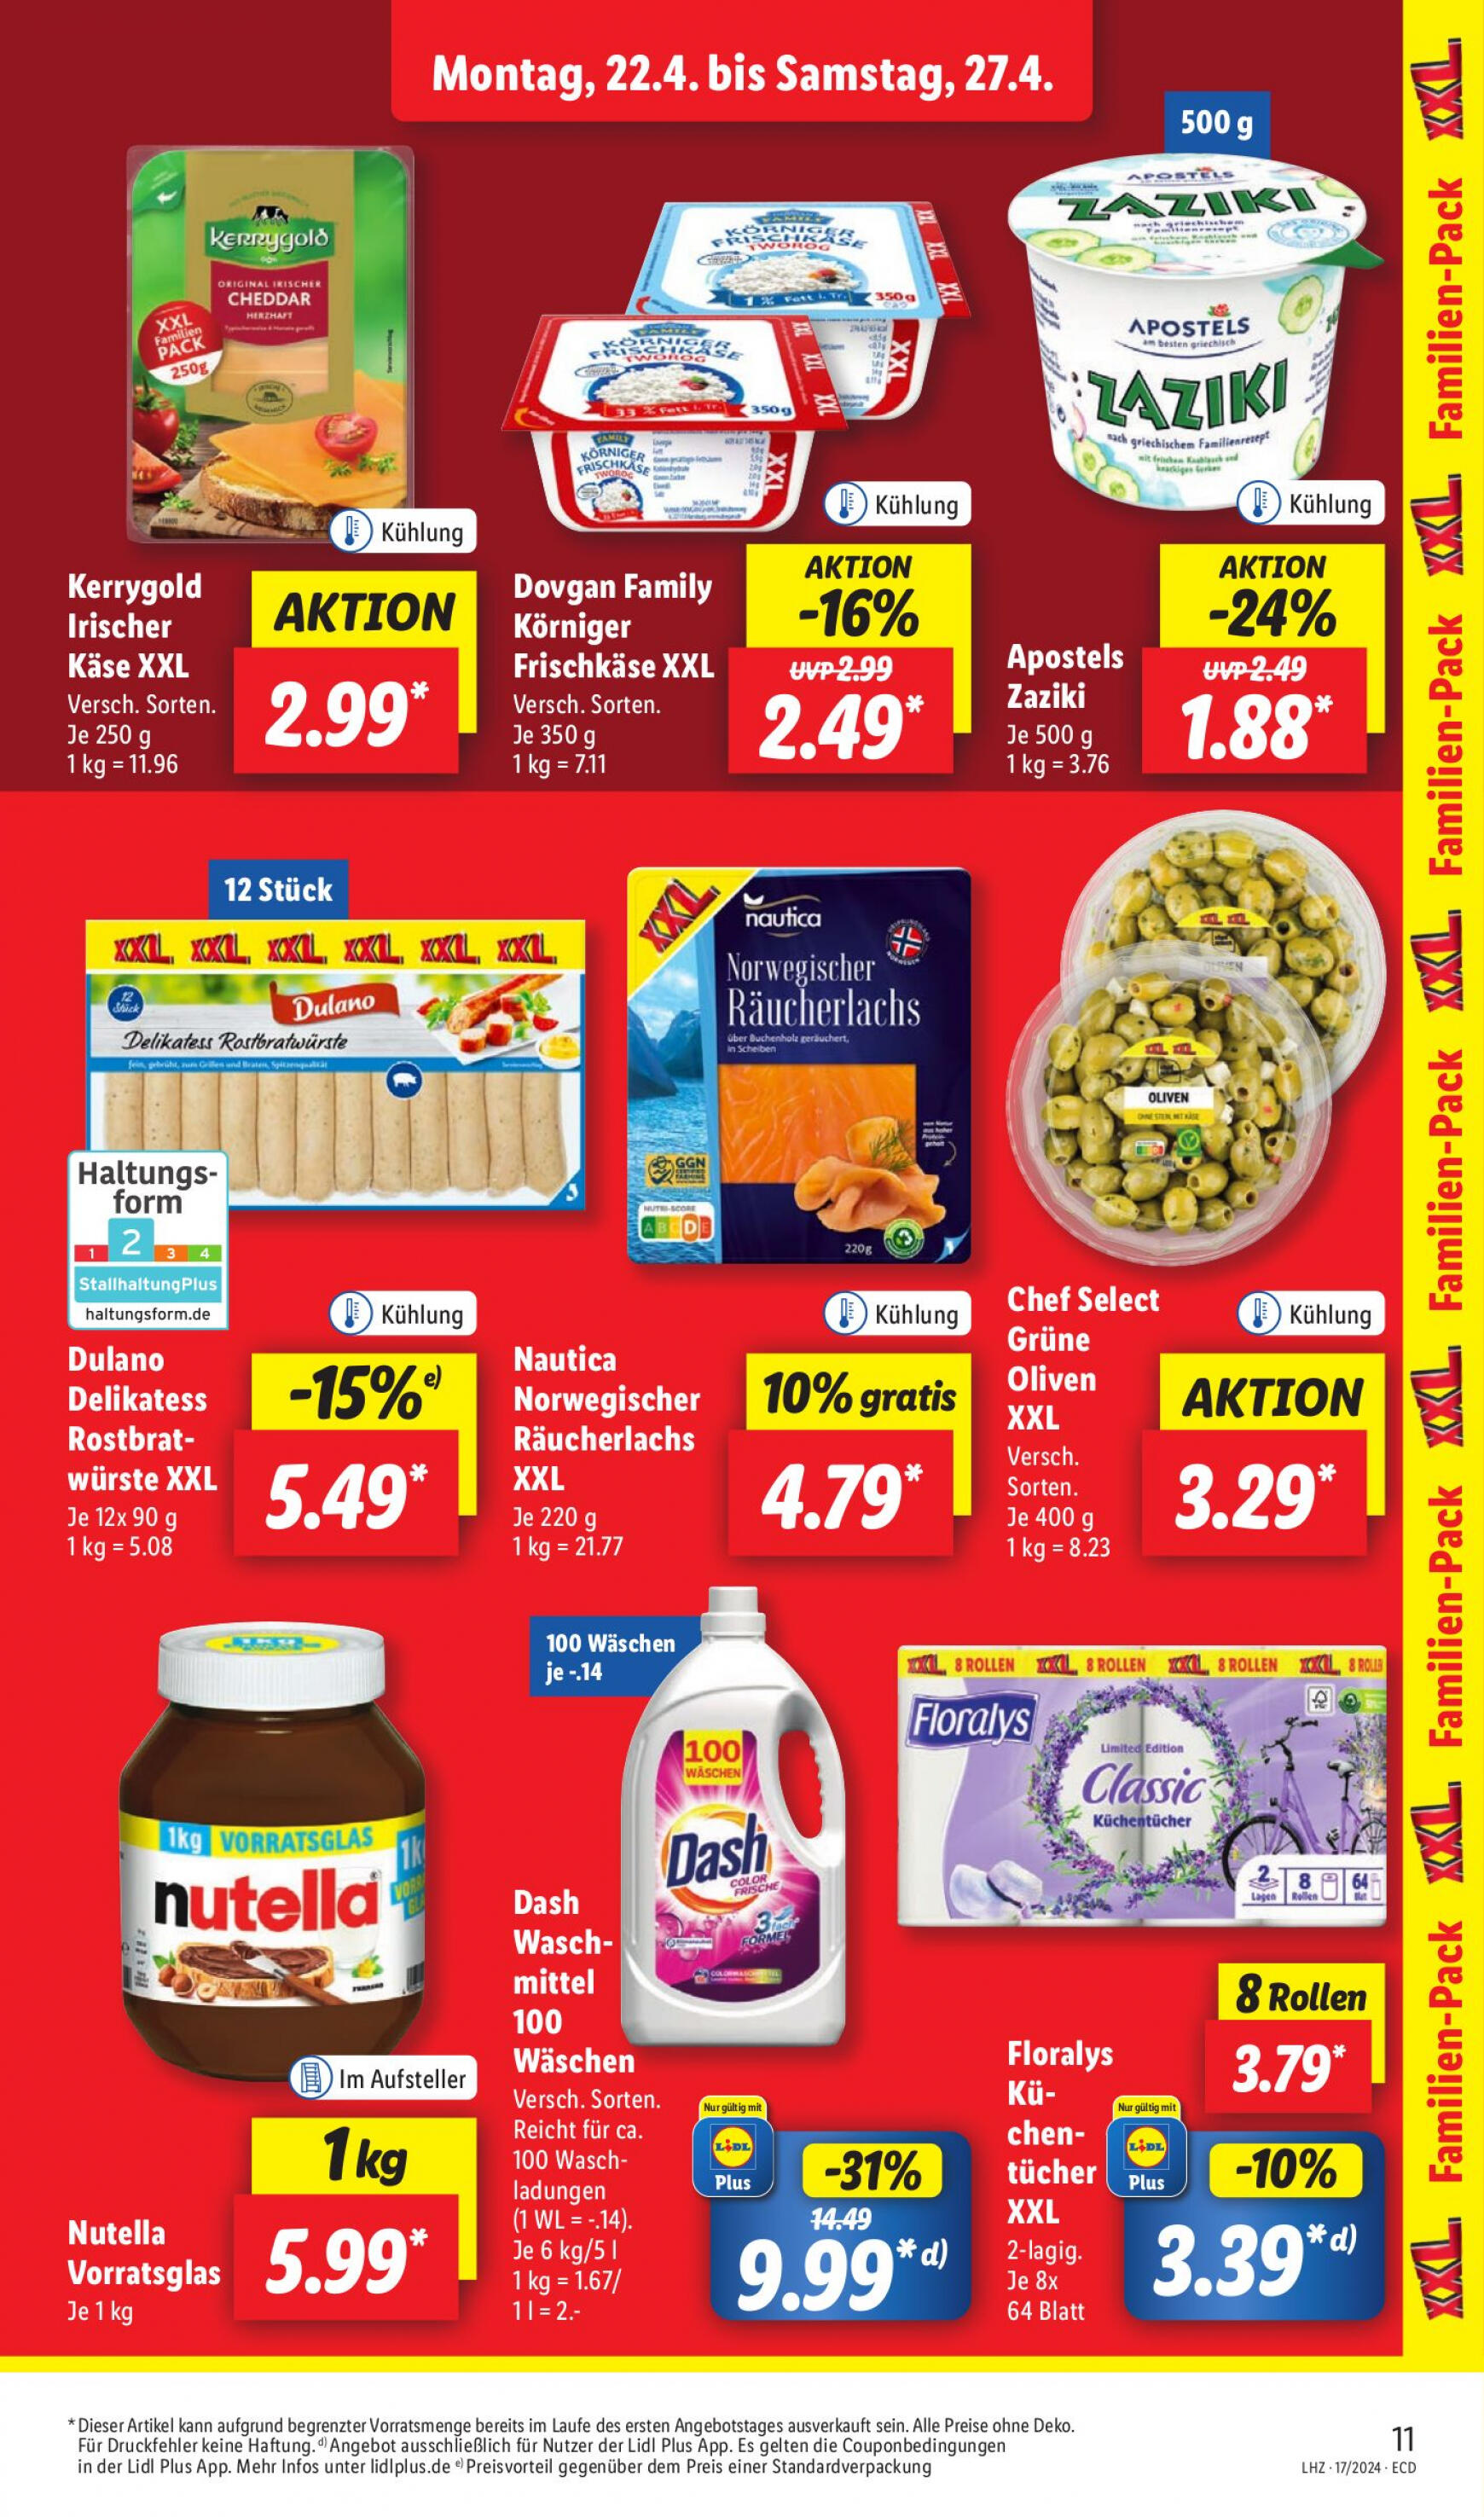 lidl - Flyer Lidl aktuell 22.04. - 27.04. - page: 17